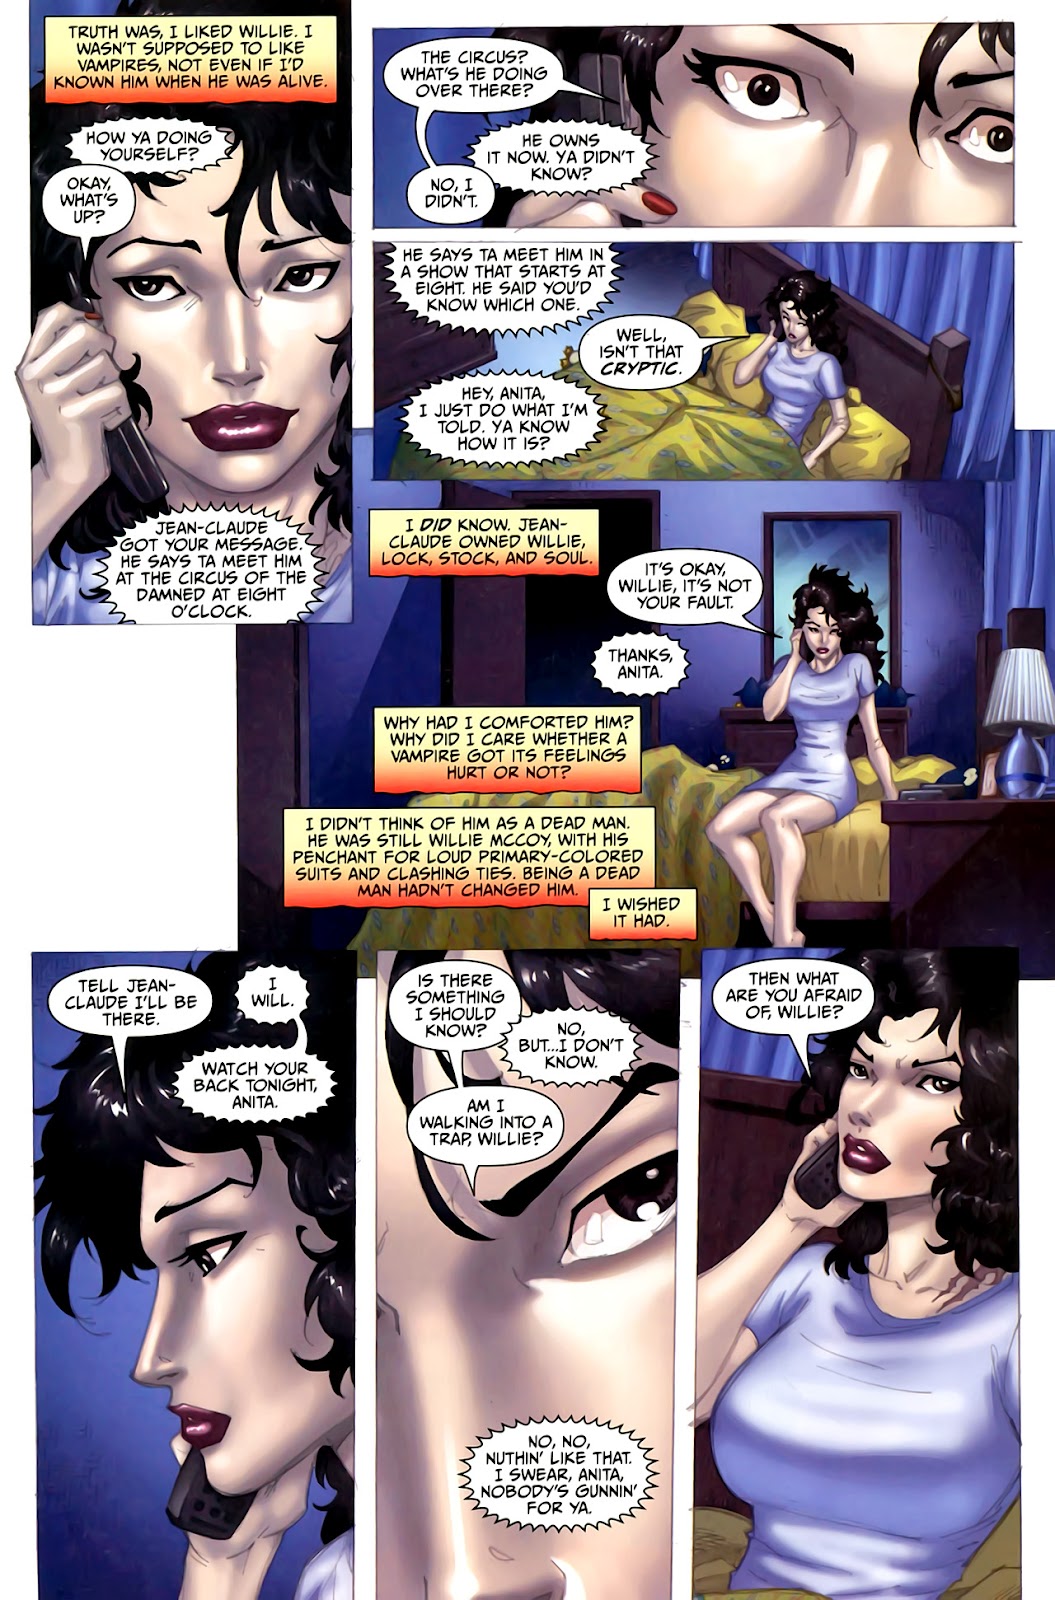 Anita Blake, Vampire Hunter: Circus of the Damned - The Charmer issue 2 - Page 5